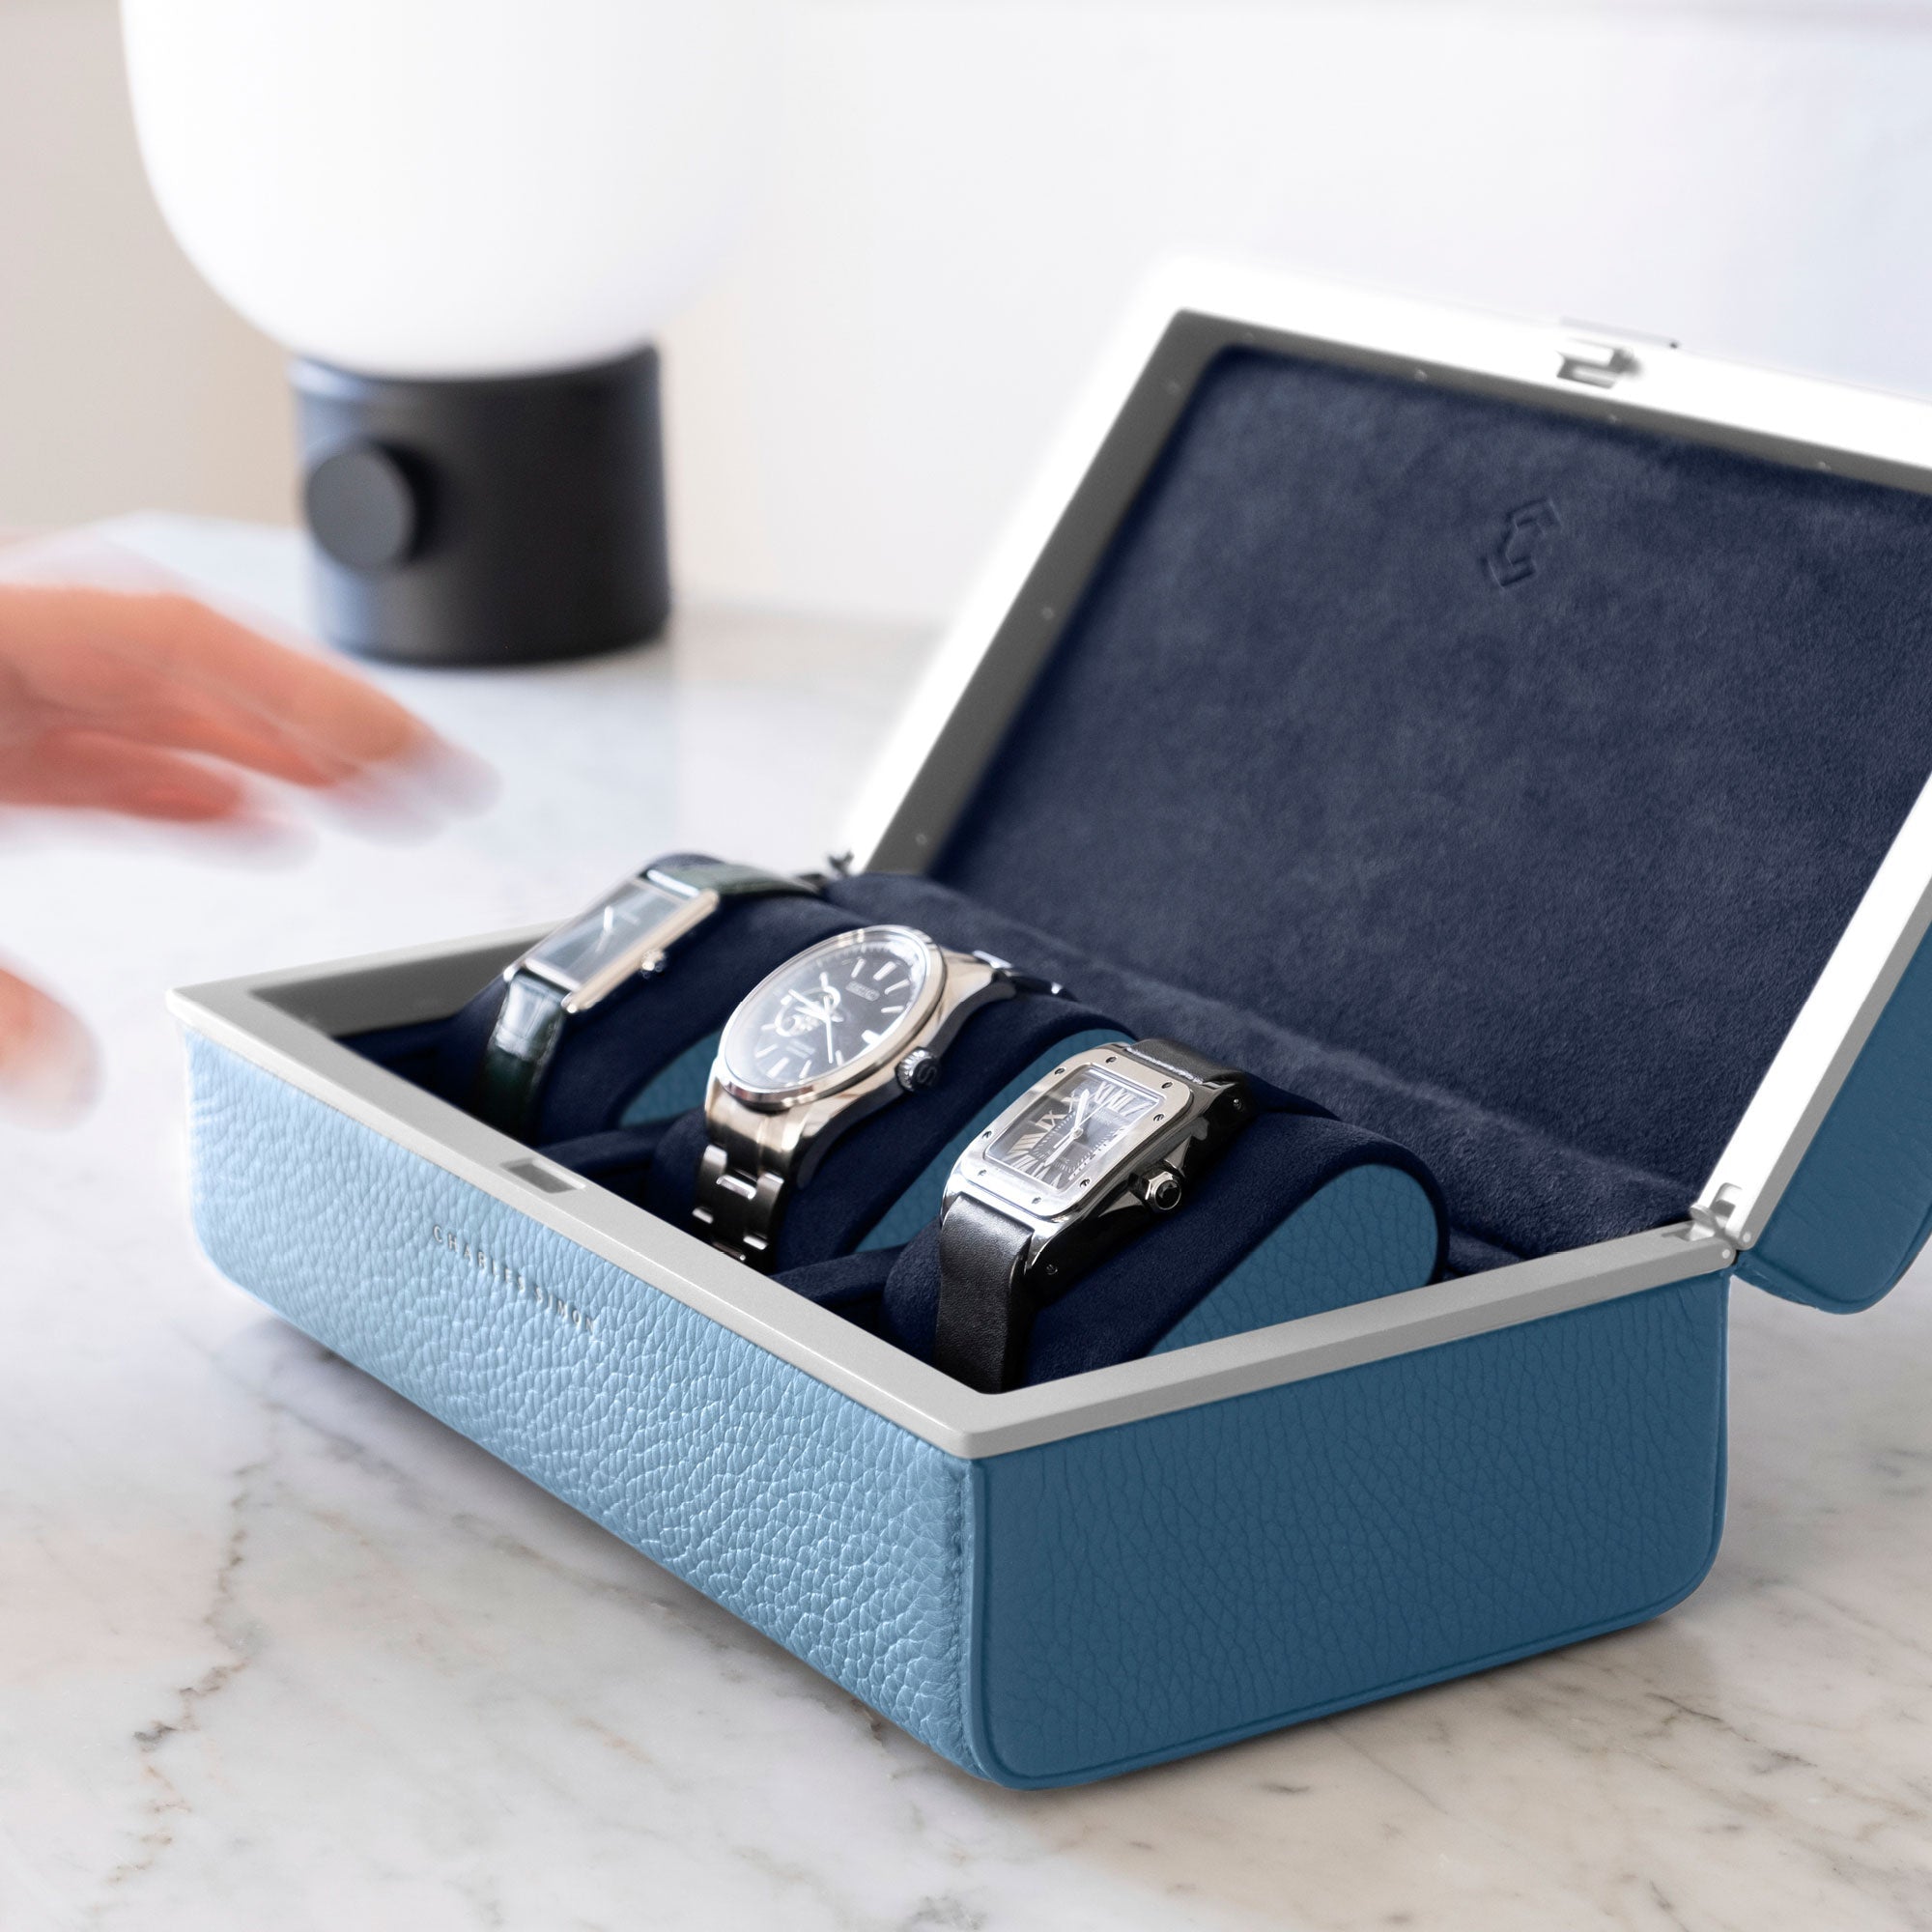 Lifestyle shot of Eaton 3 watch case for 3 watches holding a watch collection of 3 luxury timepieces